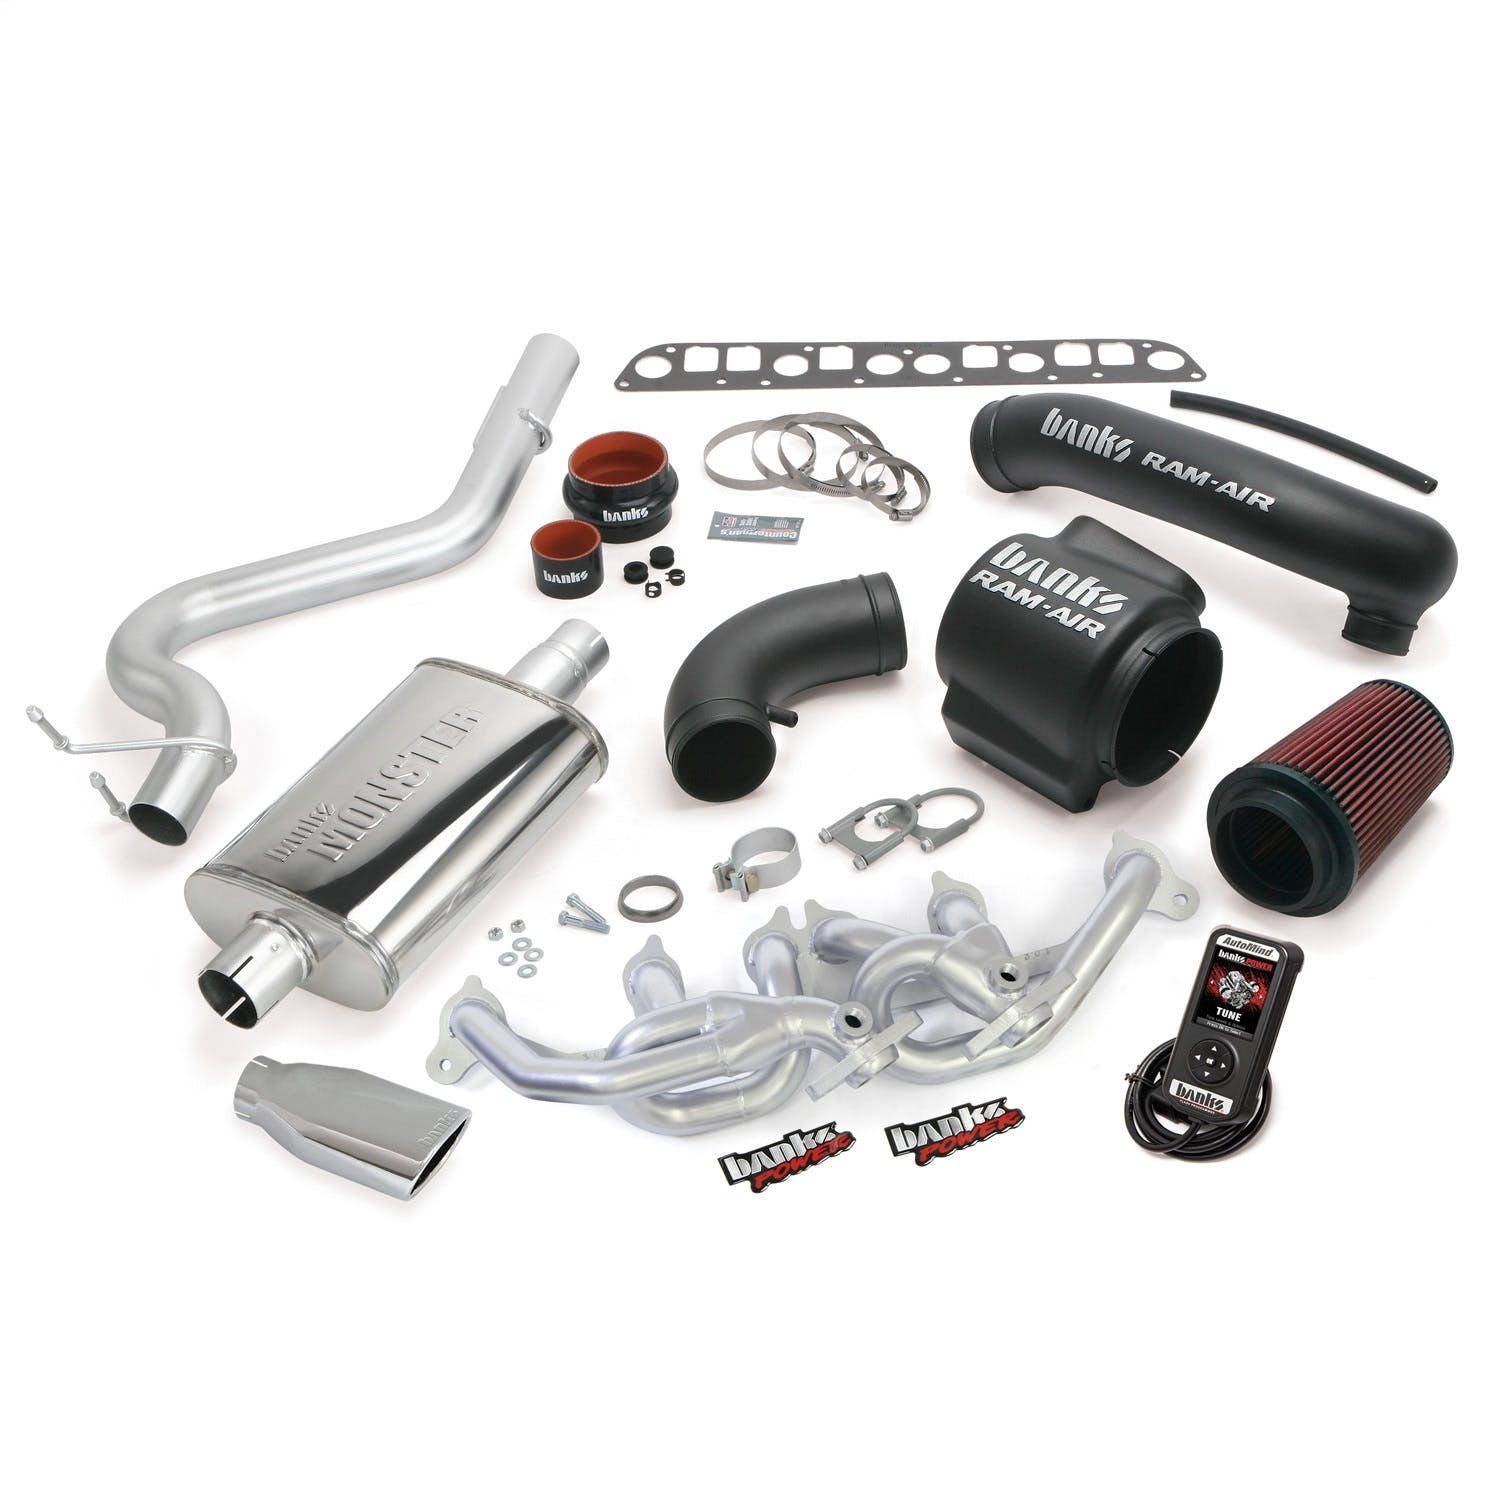 Banks Power 51333 Powerpack System-2000-03 Jeep 4.0L Wrangler